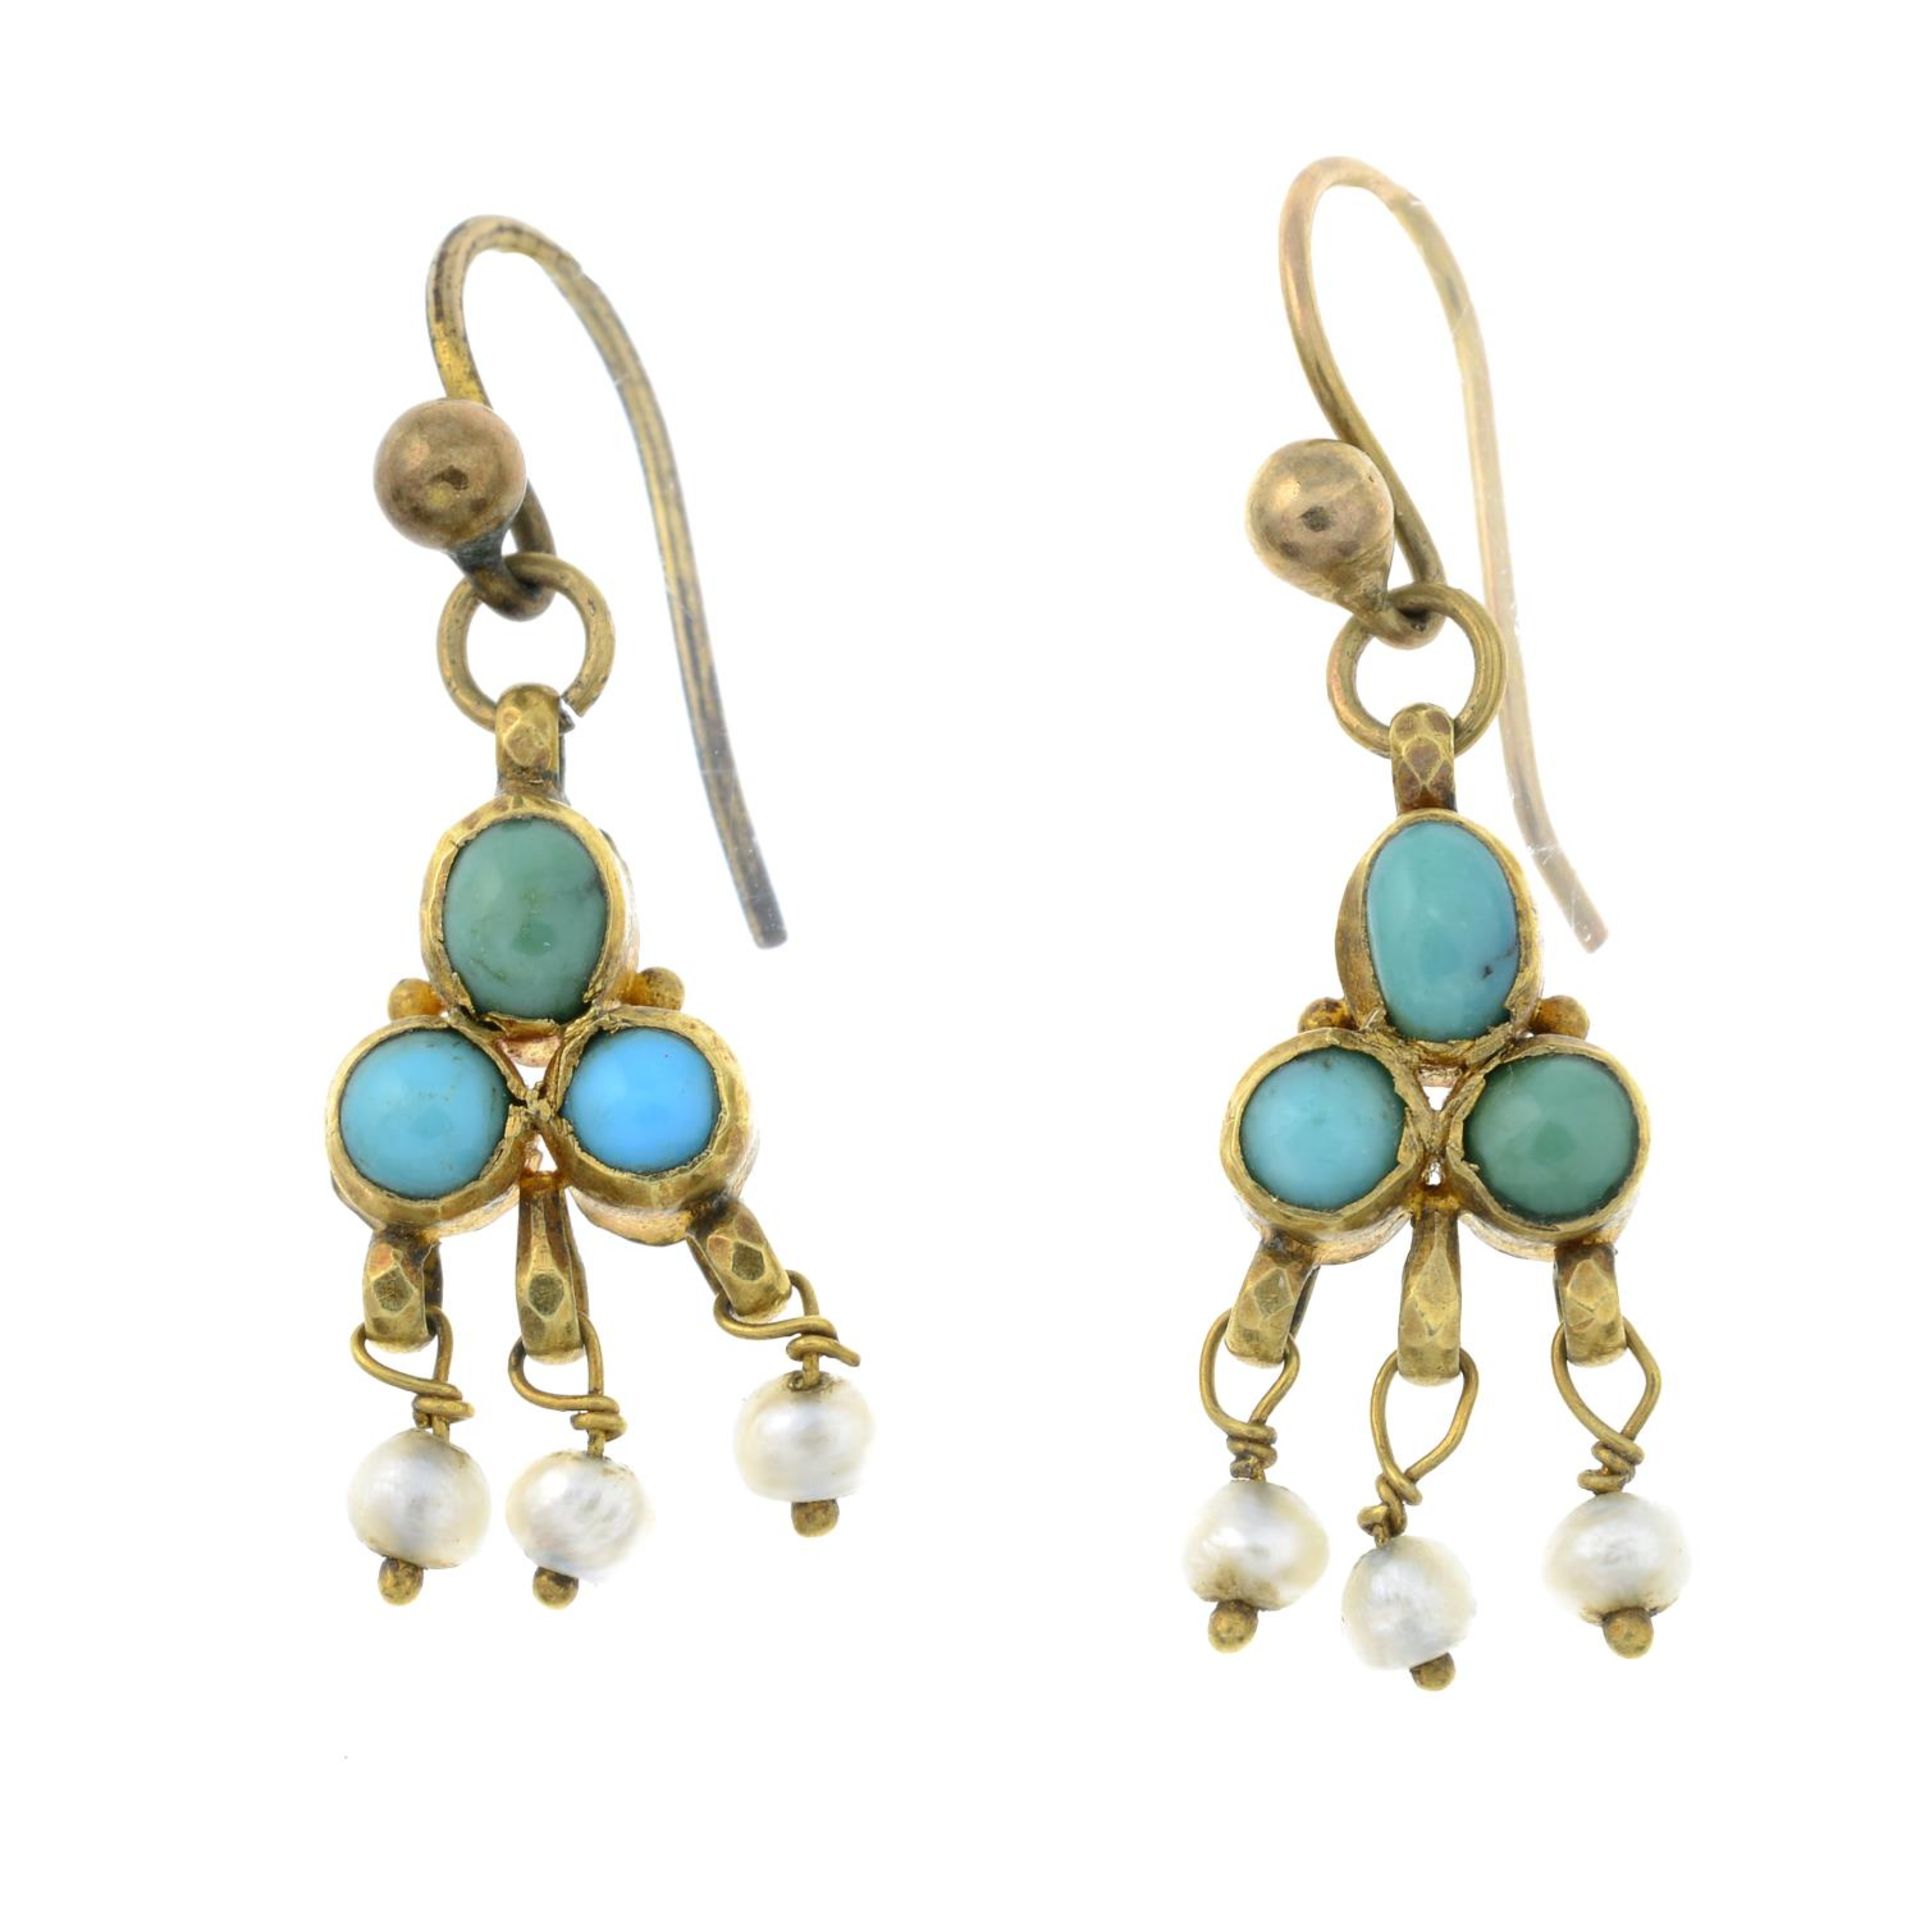 A pair of 19th century gold turquoise and seed pearl drop earrings.